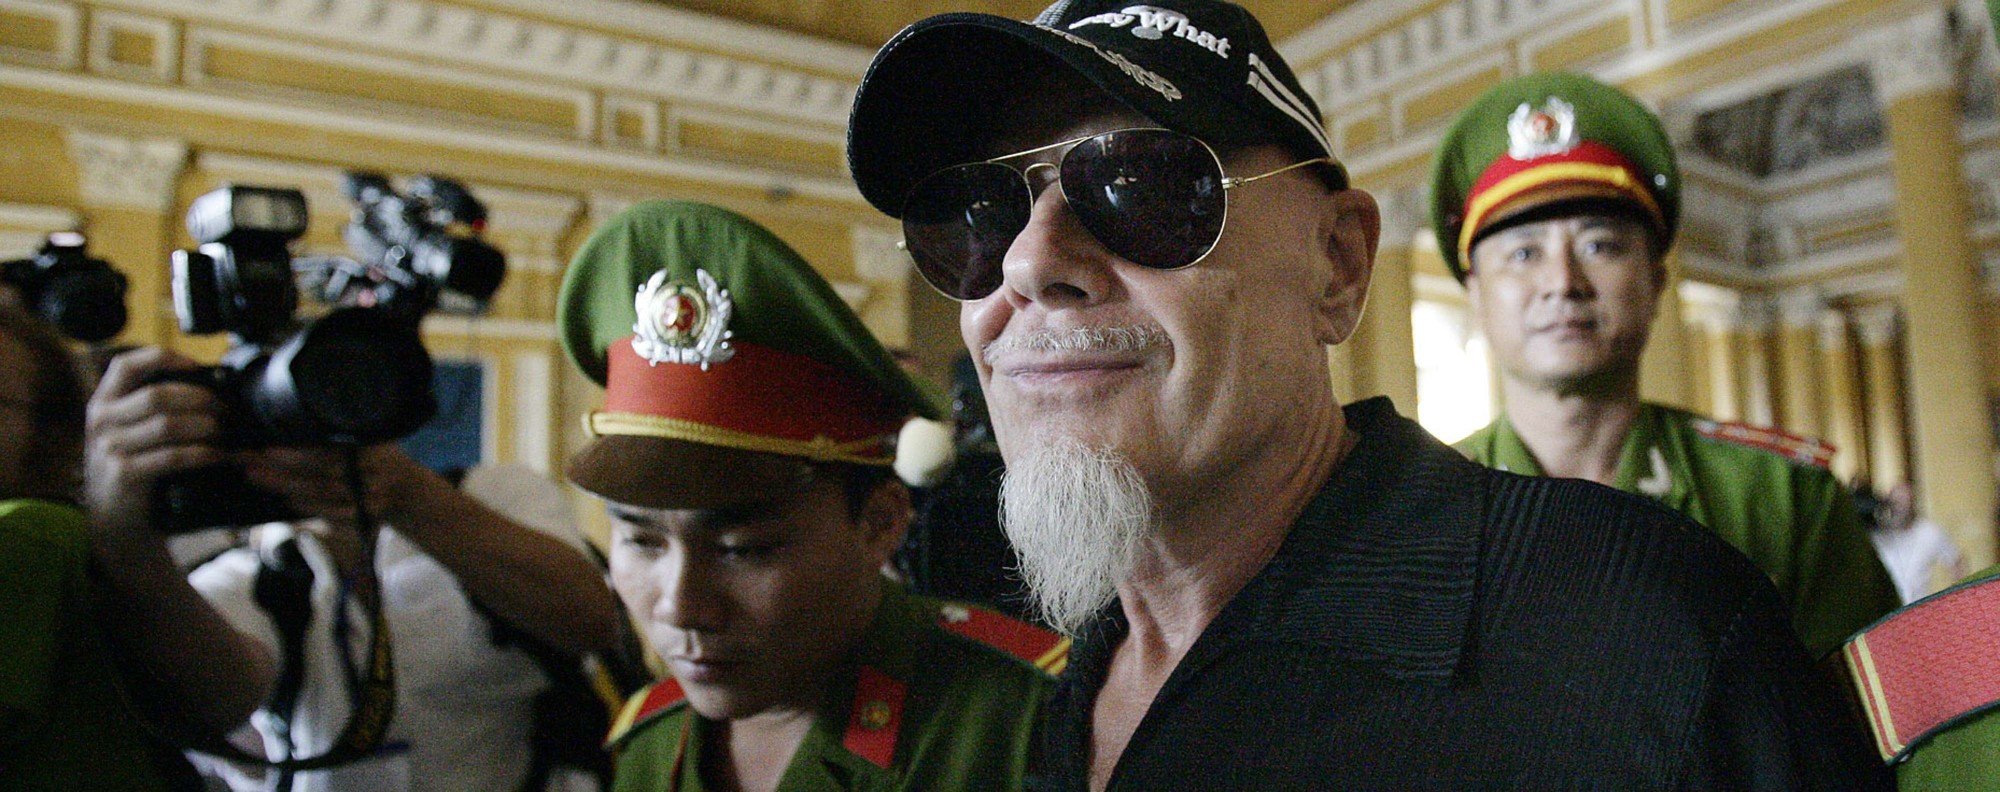 Gary Glitter in Vietnam after his expulsion from Cambodia. Photo: AFP